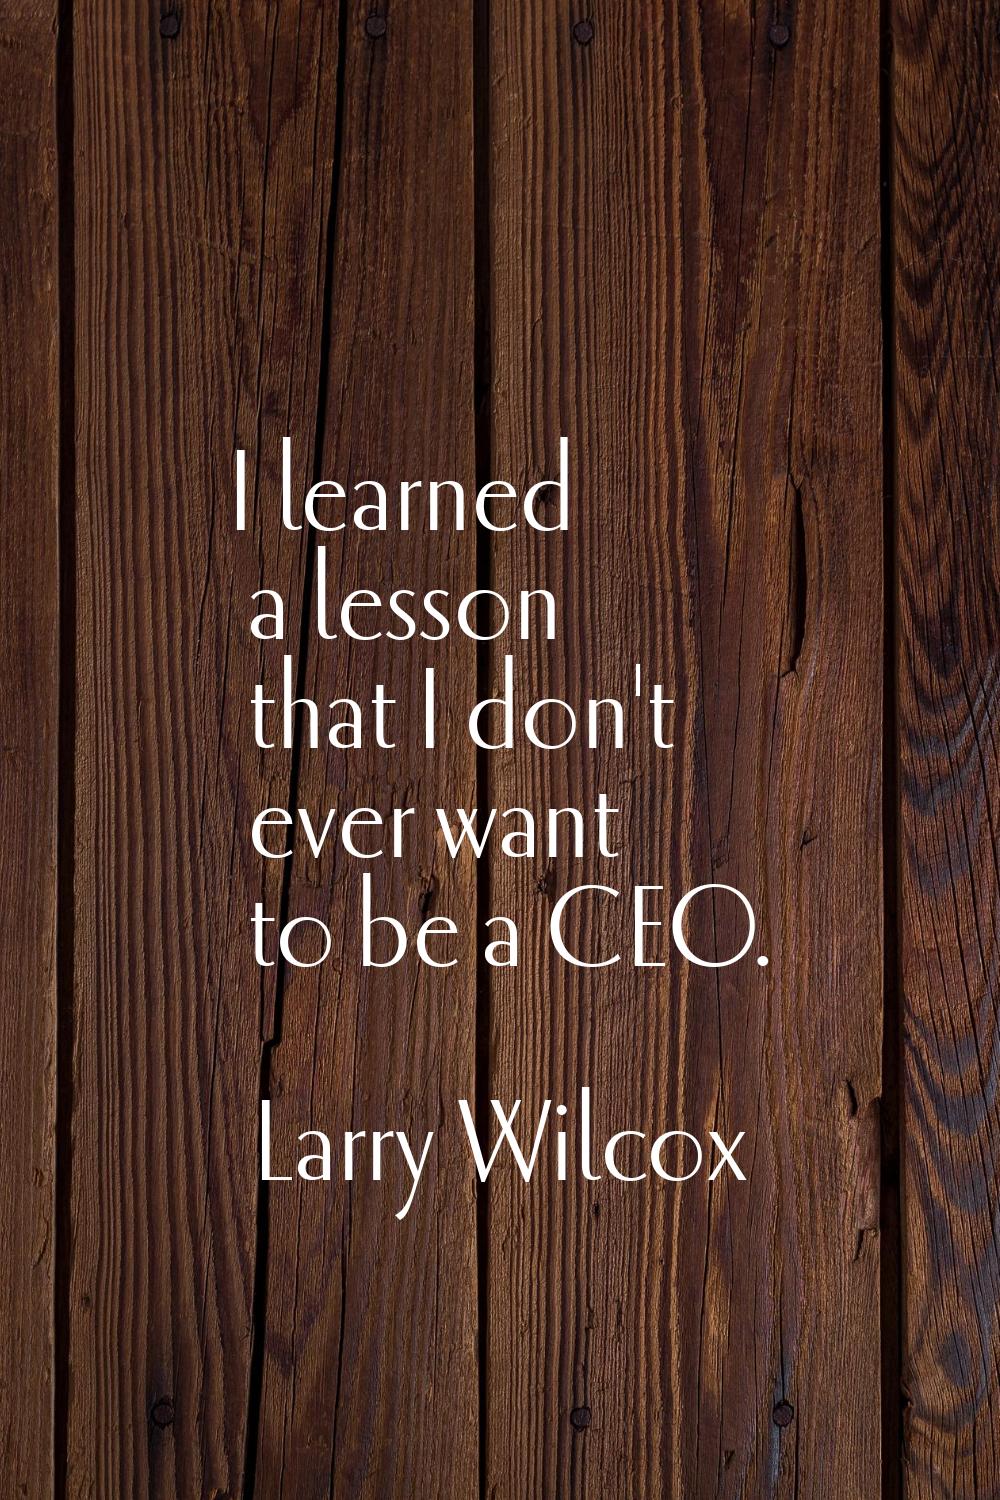 I learned a lesson that I don't ever want to be a CEO.